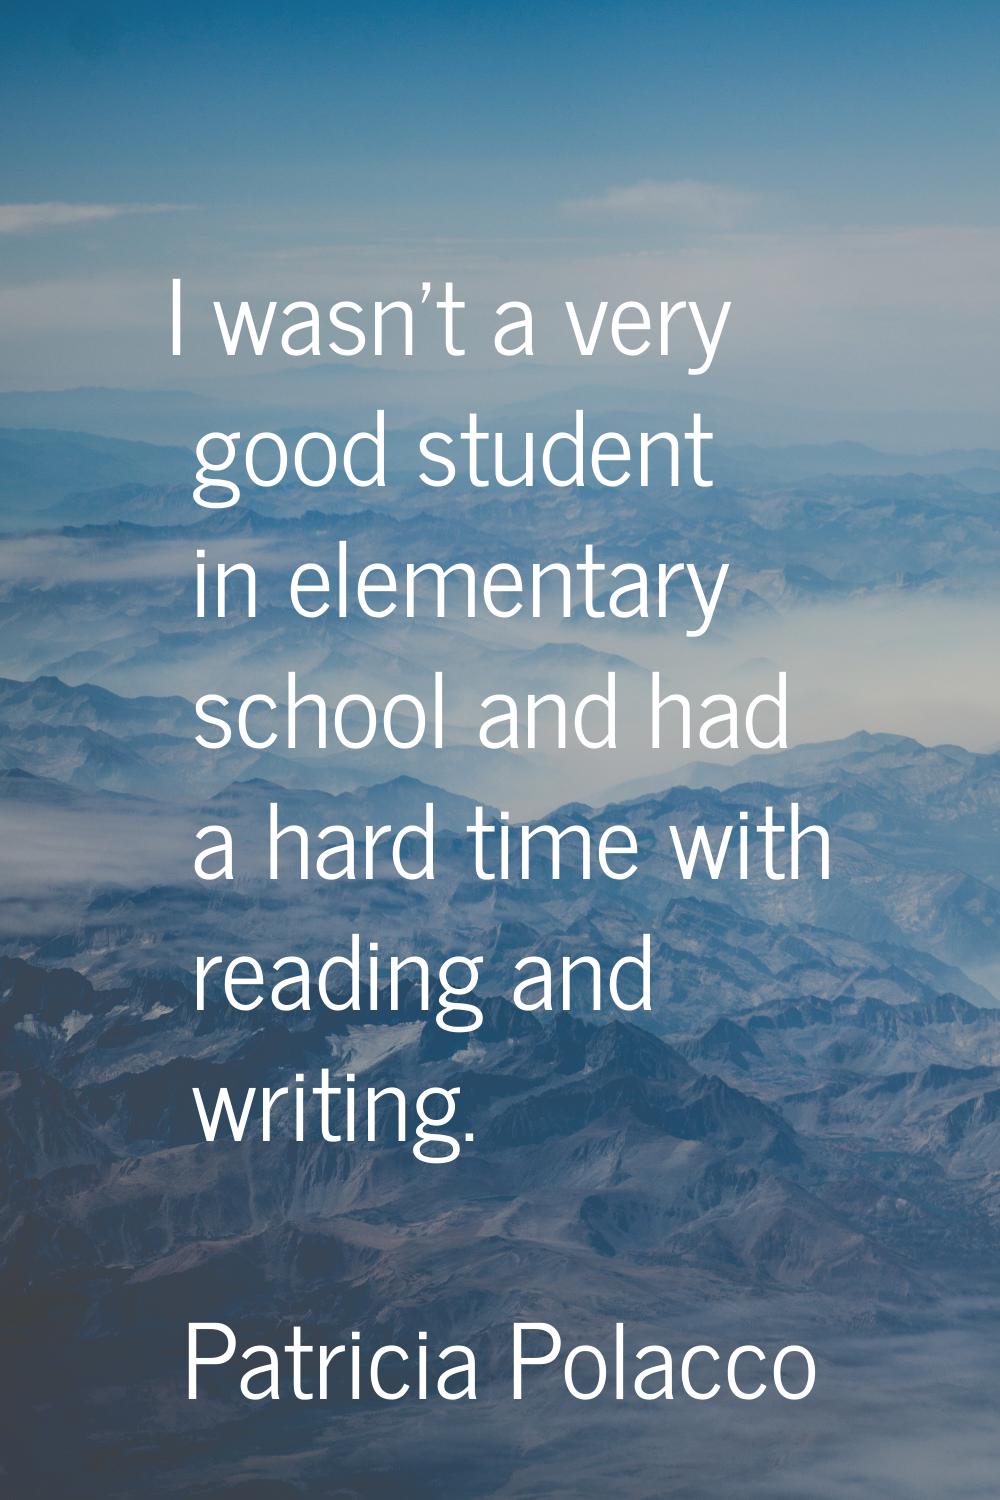 I wasn't a very good student in elementary school and had a hard time with reading and writing.